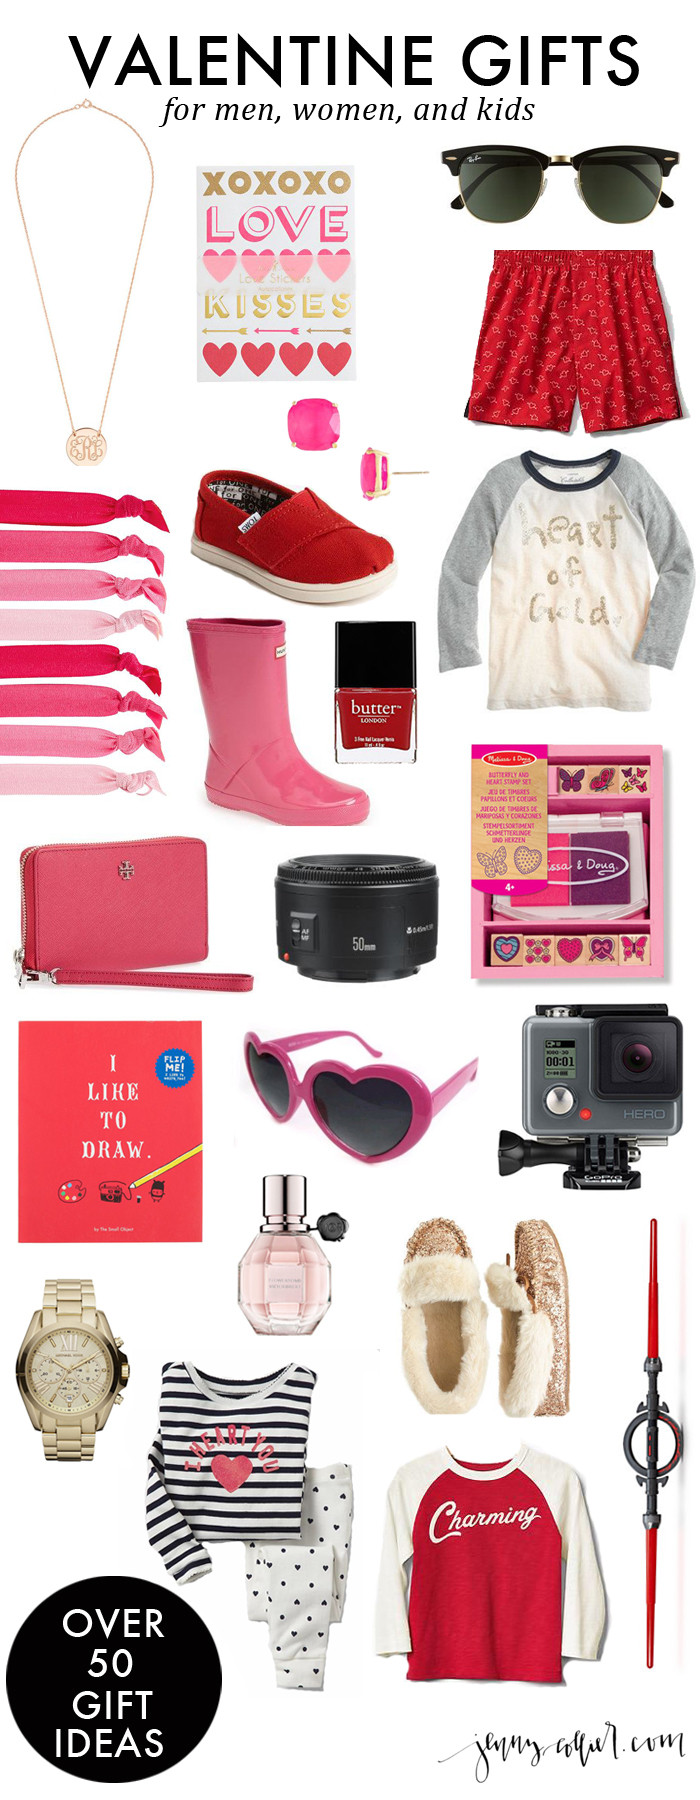 Valentines Gift Ideas For Women
 Valentine Gifts for Men Women and Kids jenny collier blog